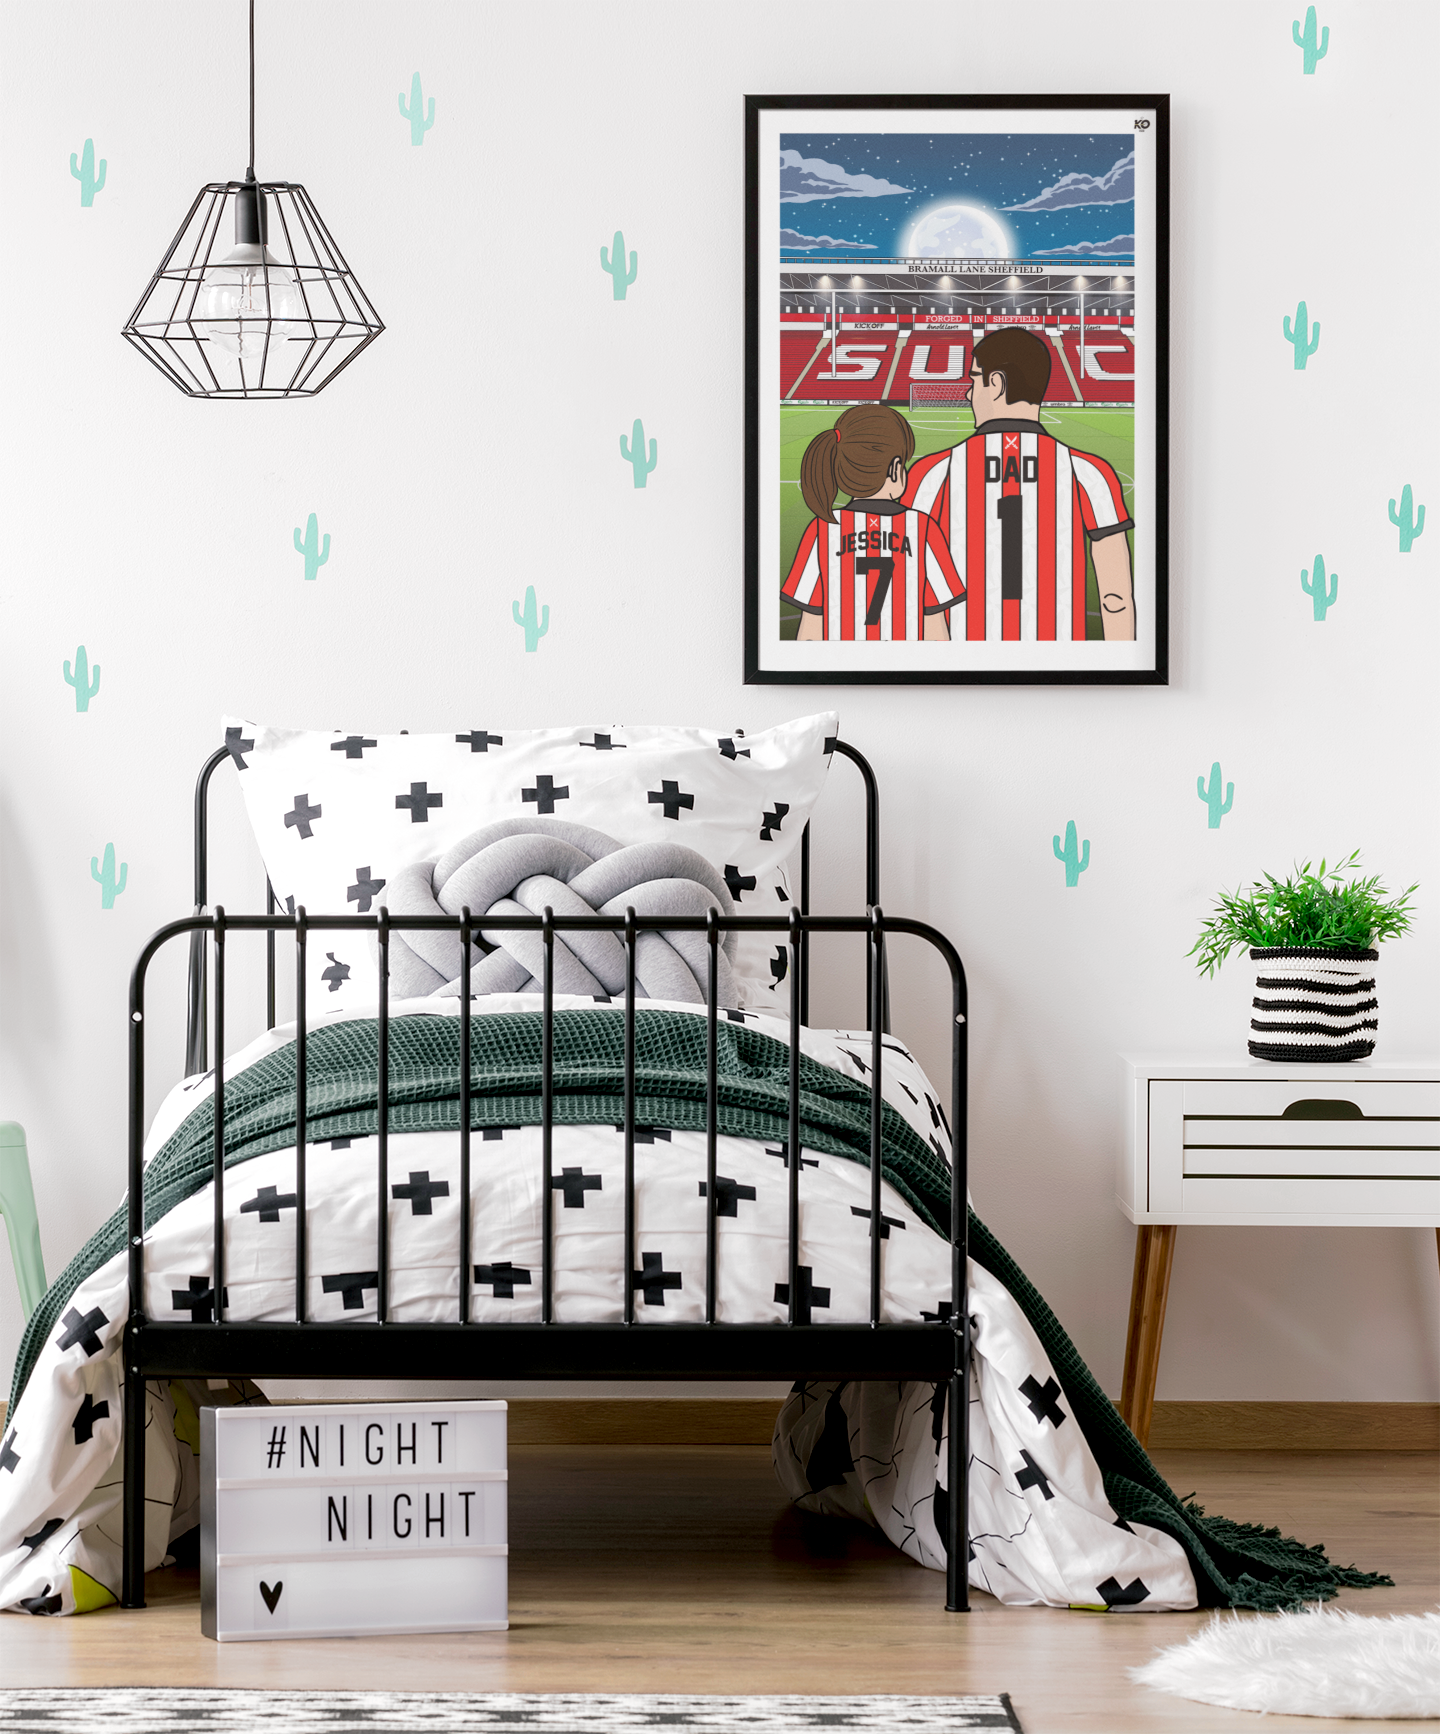 Personalised Sheffield United fc custom Dad & Lass PITCH PRINT - SUFC, The Blades, Bramall Lane Football Gift Art Prints Gifts teen